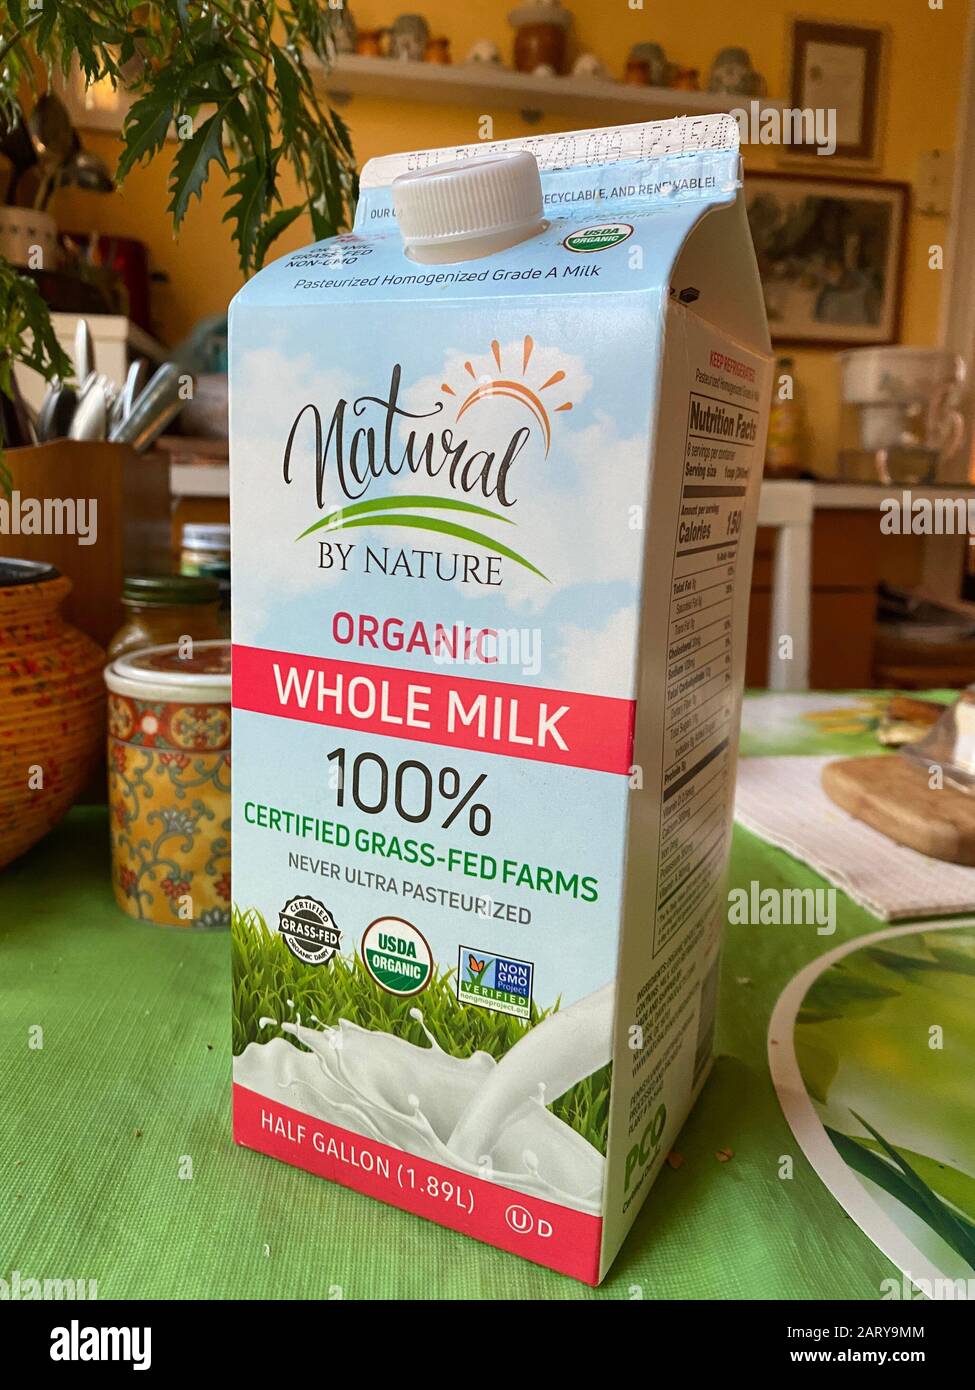 https://c8.alamy.com/comp/2ARY9MM/12-gallon-of-organic-whole-milk-more-and-more-people-want-no-hormones-pesticides-or-gmo-modified-feed-in-their-dairy-products-or-meats-2ARY9MM.jpg